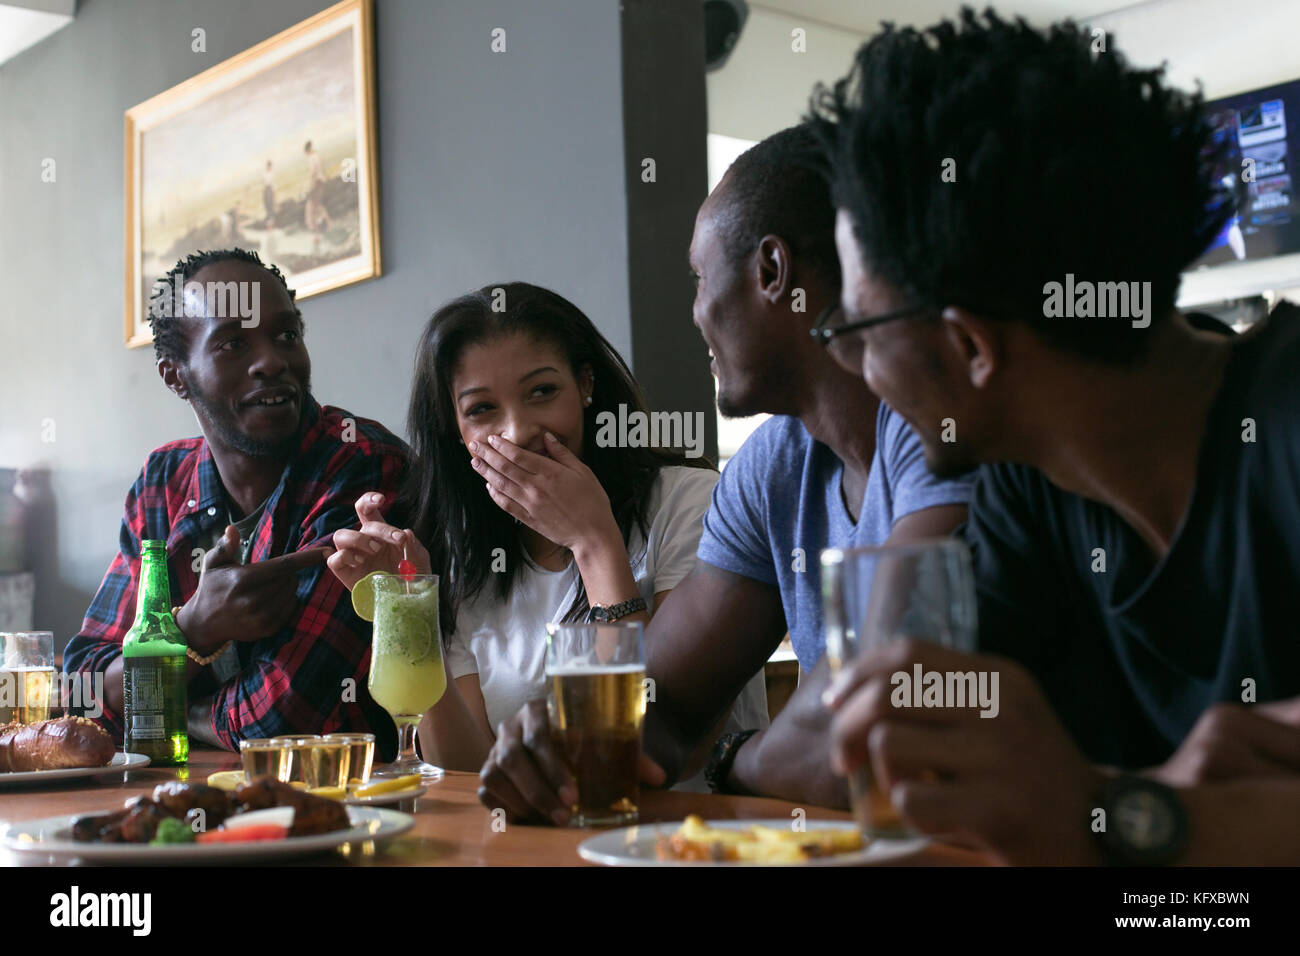 Friends socializing at a sports bar Stock Photo